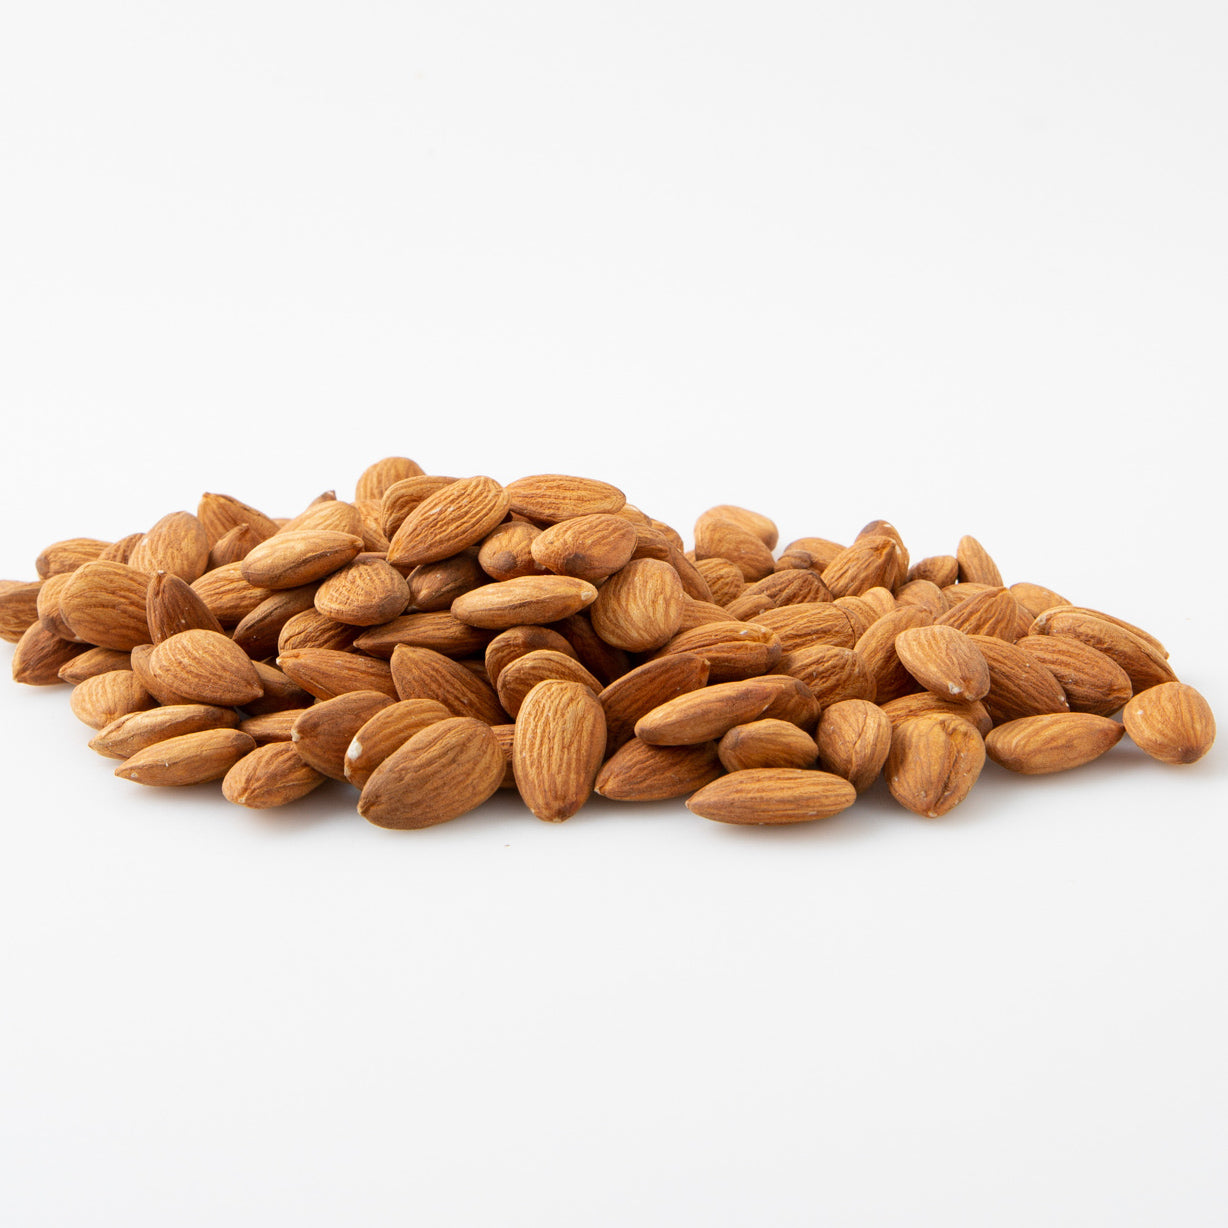 Pesticide Free Raw Almonds Kernels (Raw Nuts) Image 3 - Naked Foods